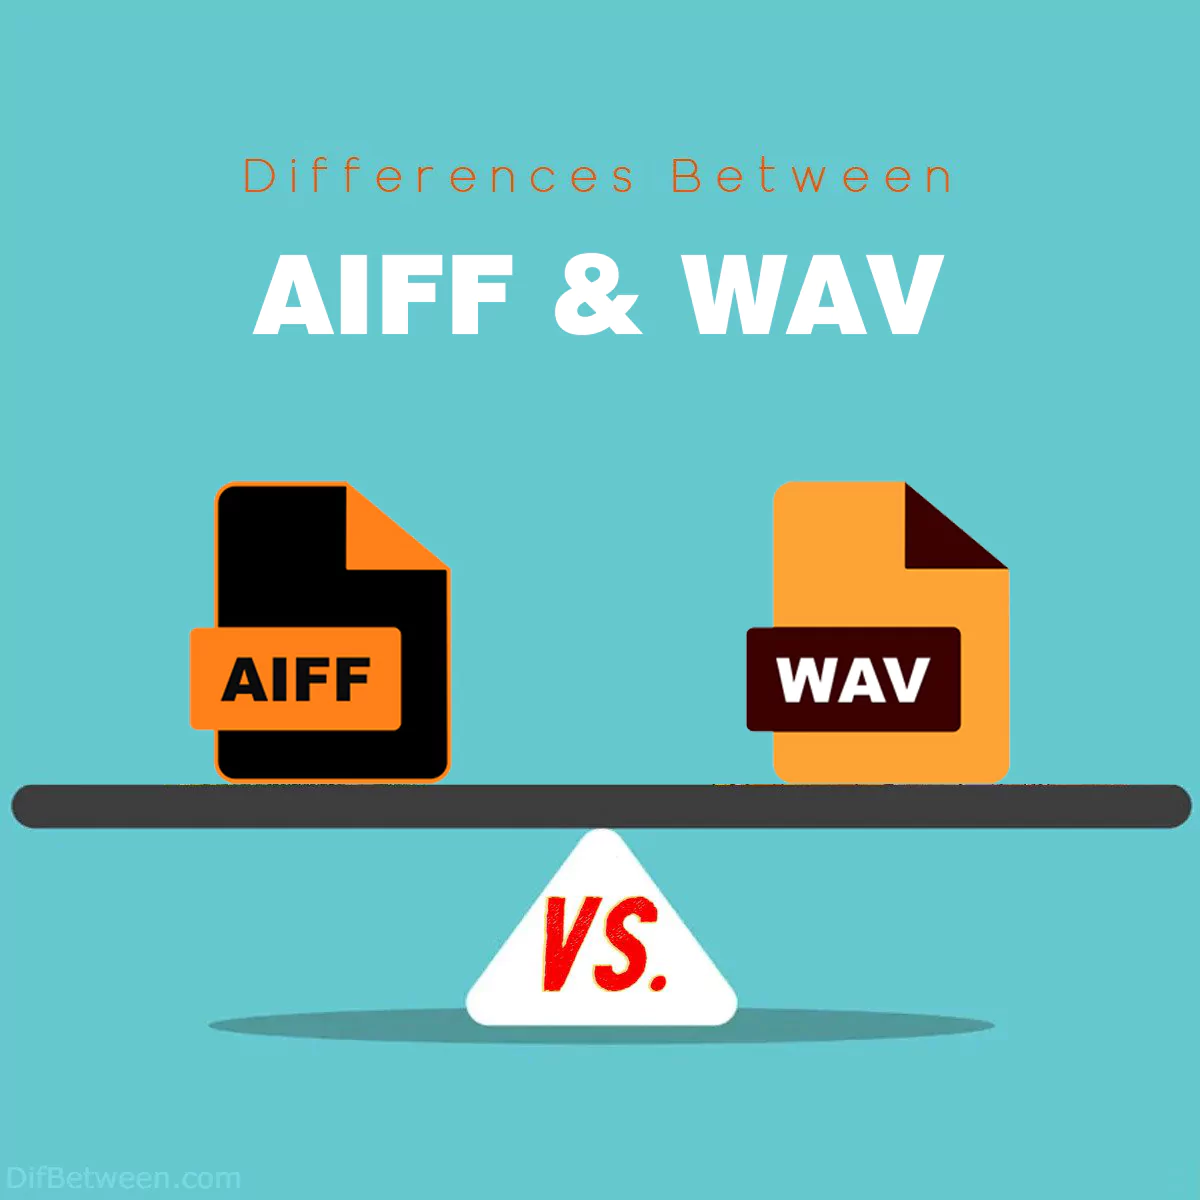 Differences Between AIFF and WAV